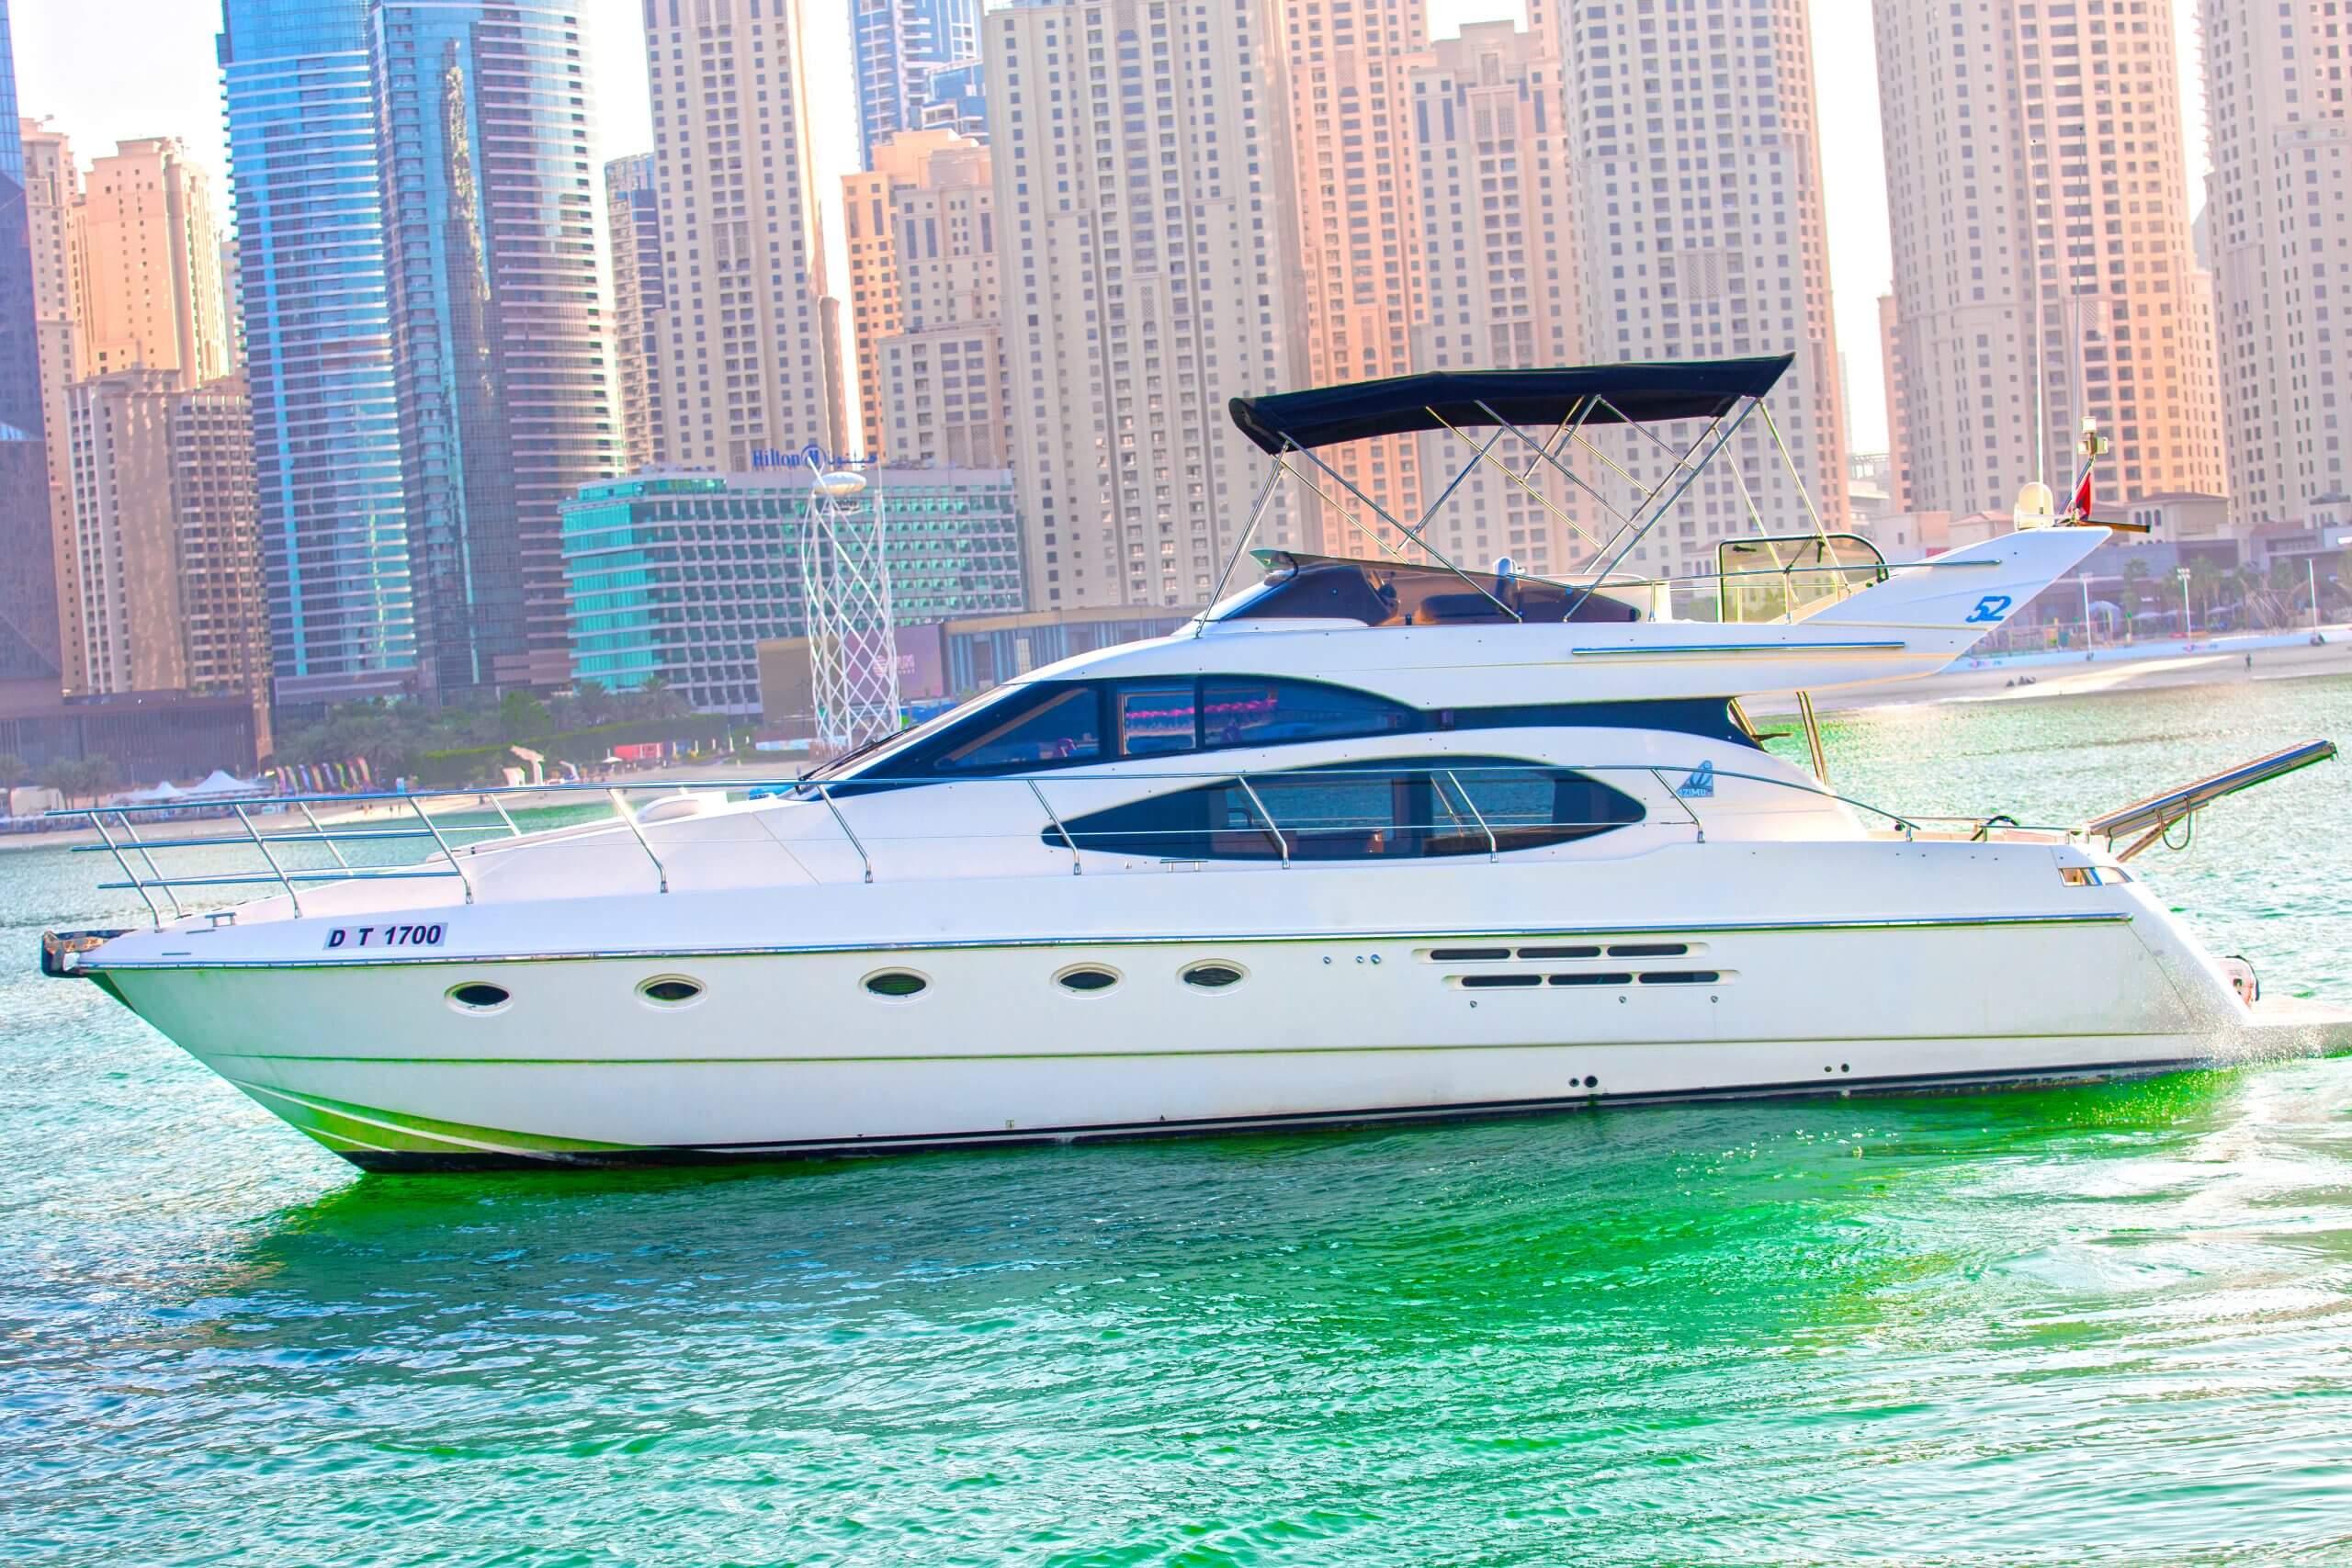 52FT (6-Hour cruise 25,000AED)